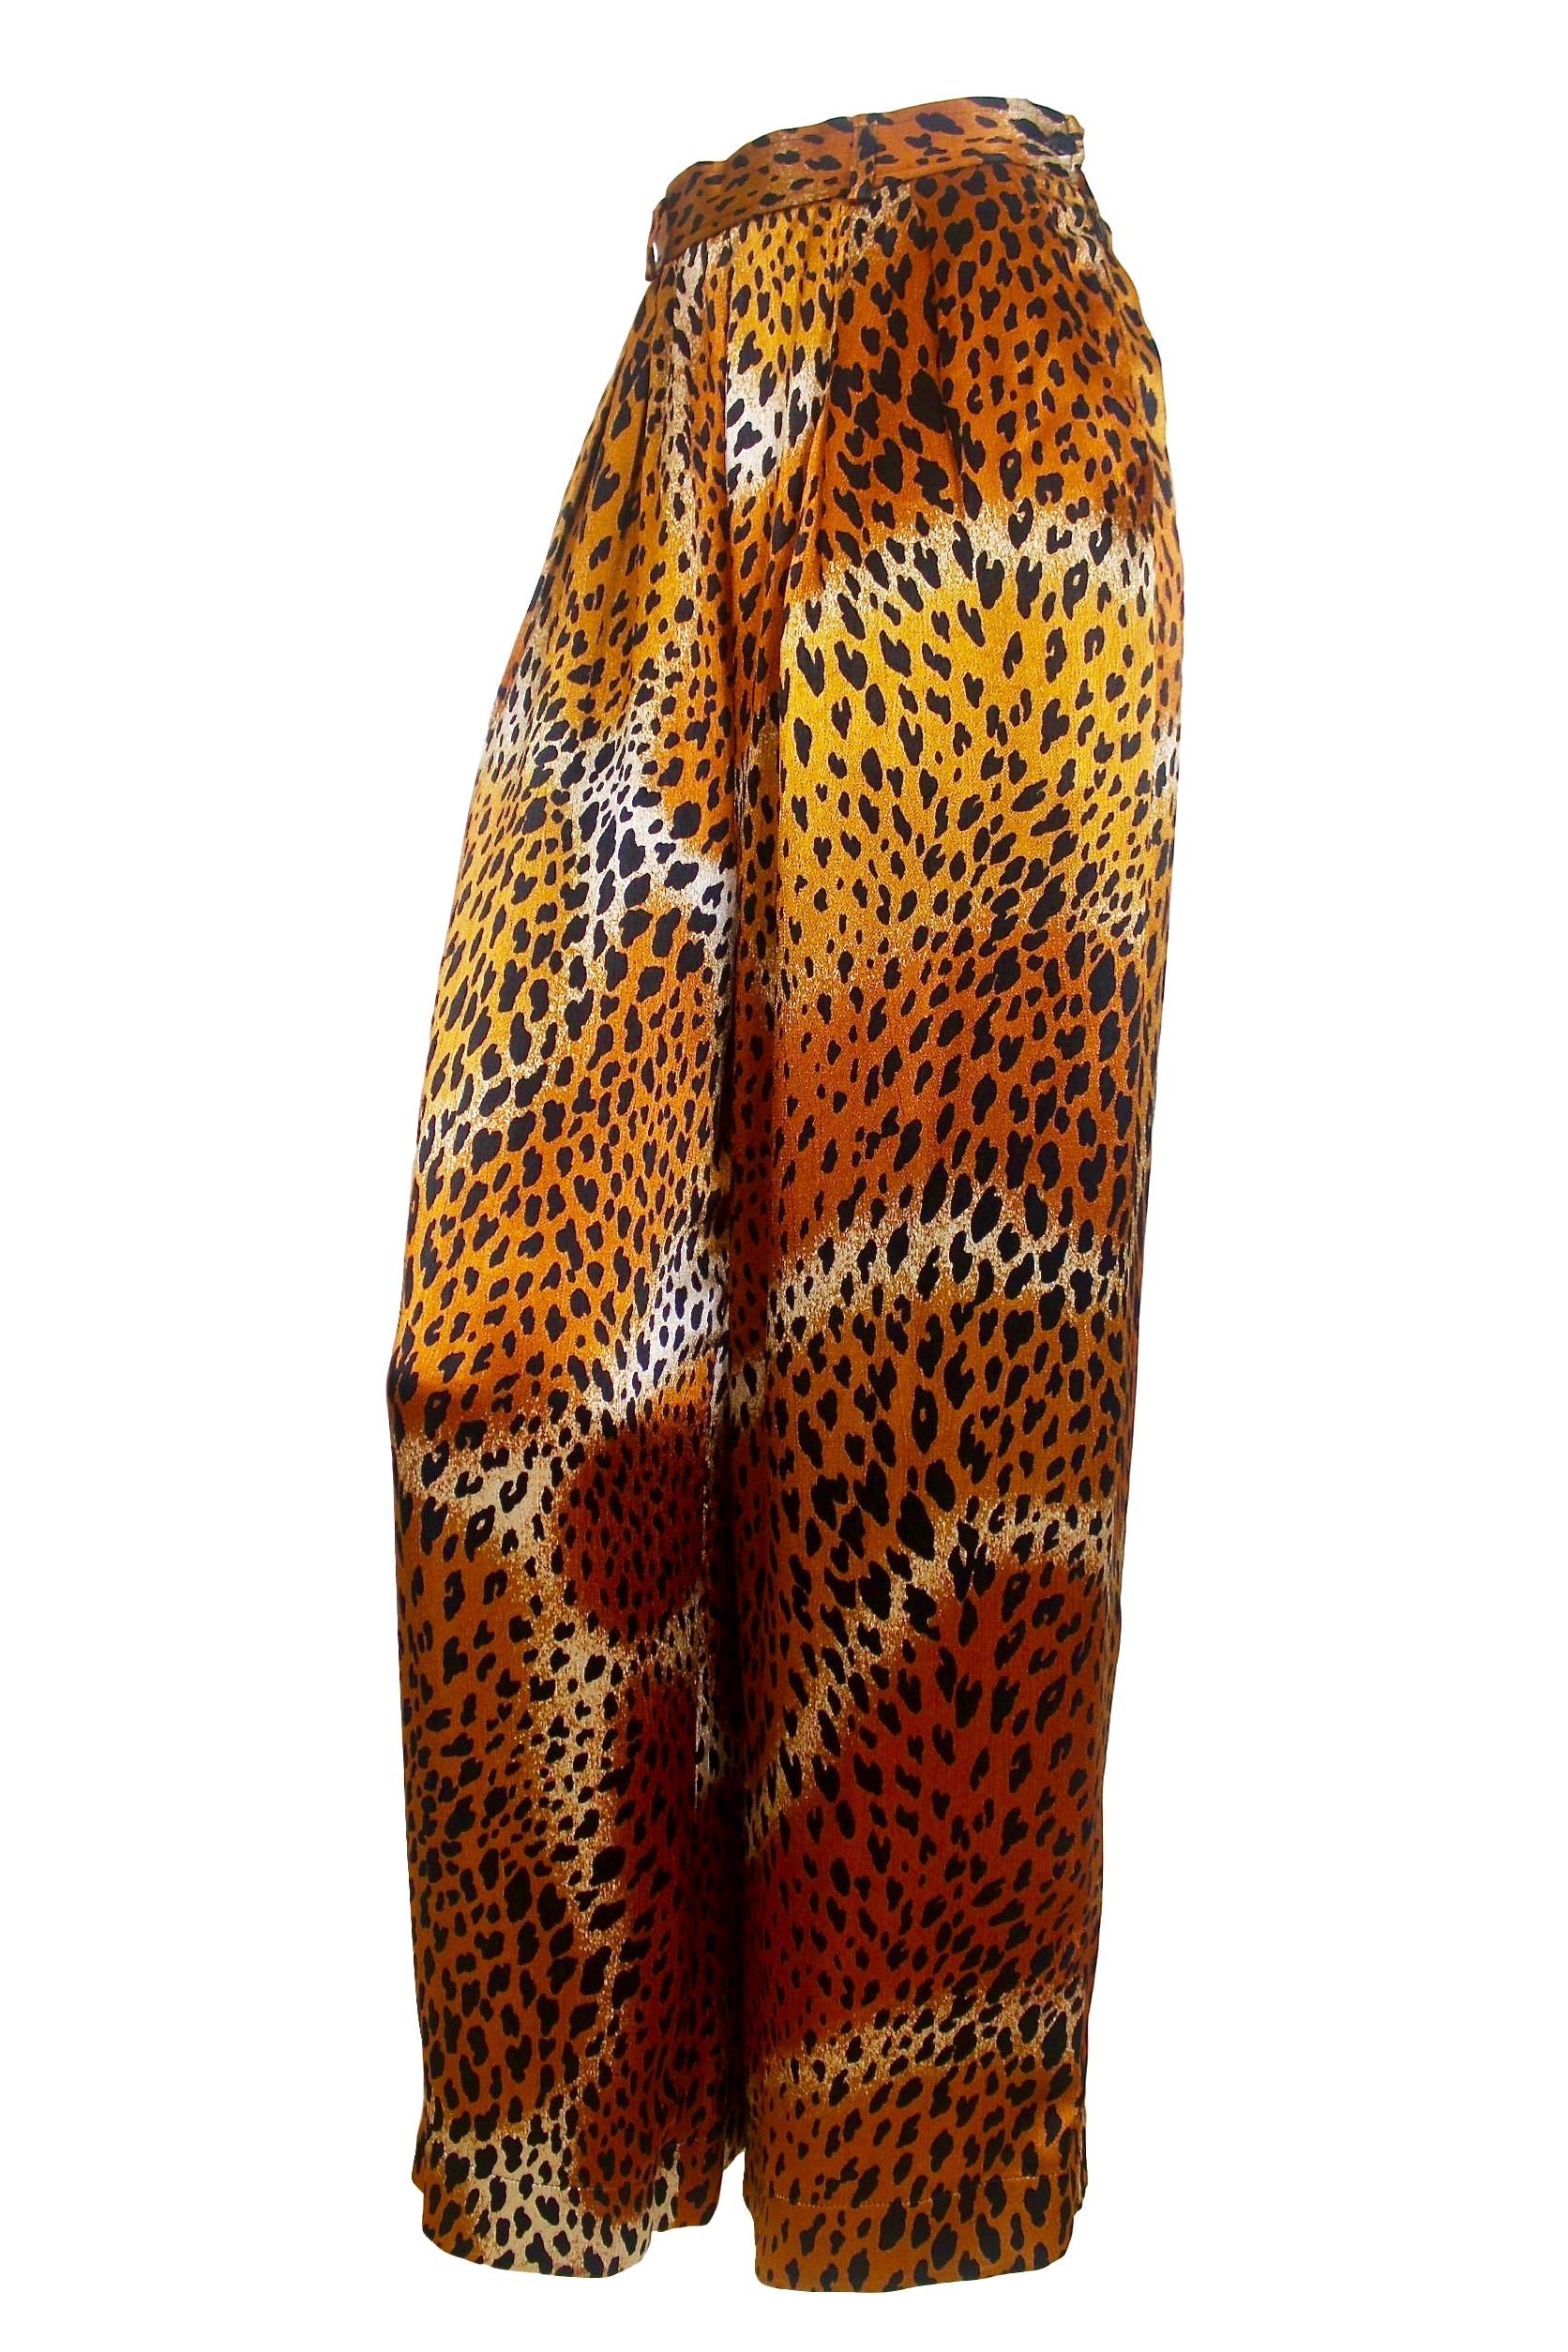 Yves Saint Laurent 1977 Leopard Print Camisole and Trousers For Sale 4